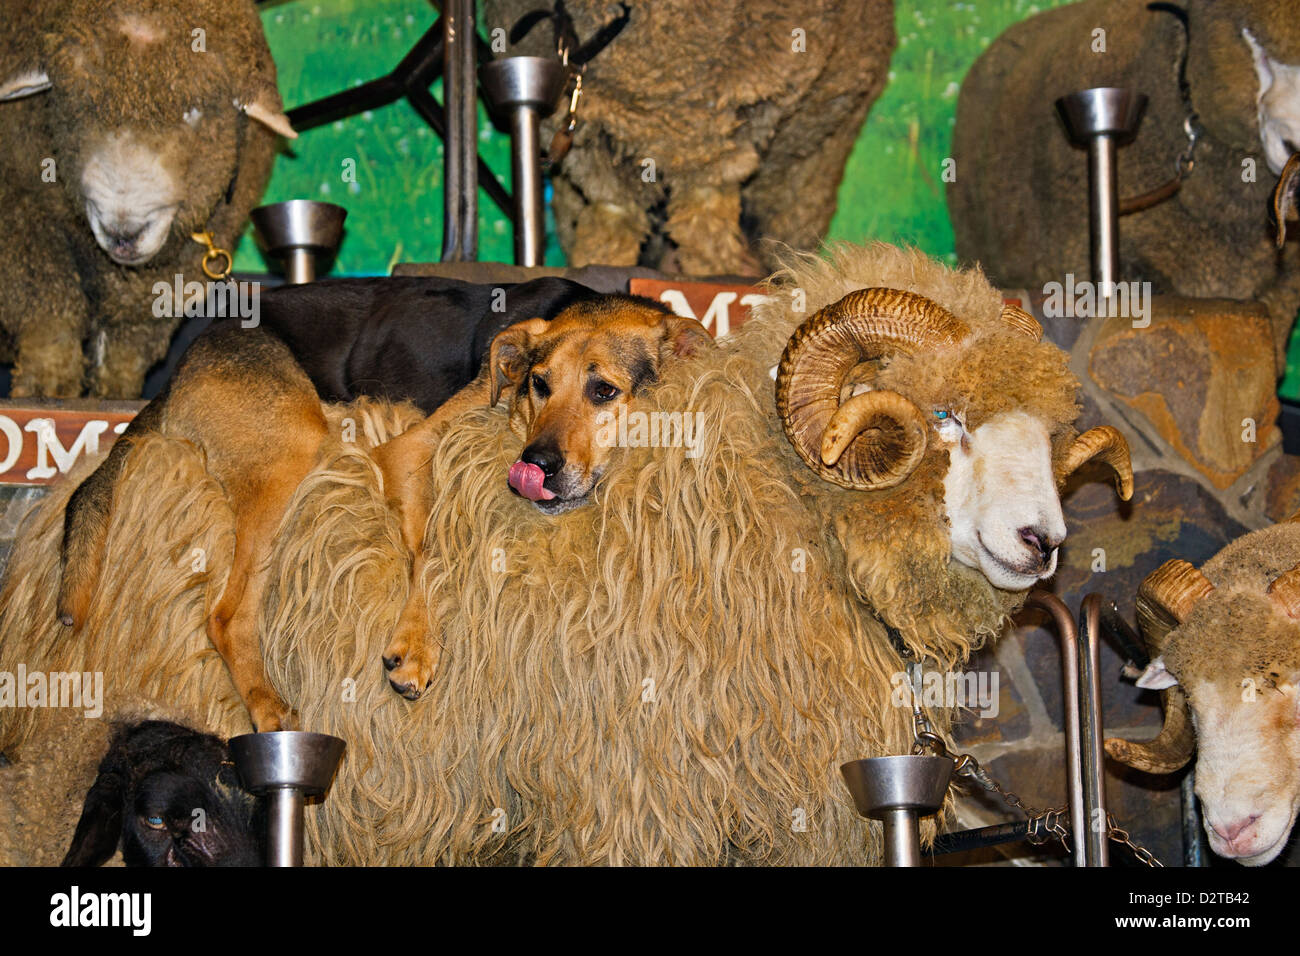 A Sheep Dog (Huntaway breed) sitting on the back of a Drysdale Breed of Sheep, Male, at the Agrodome in Rotorua, Bay of Plenty, Stock Photo